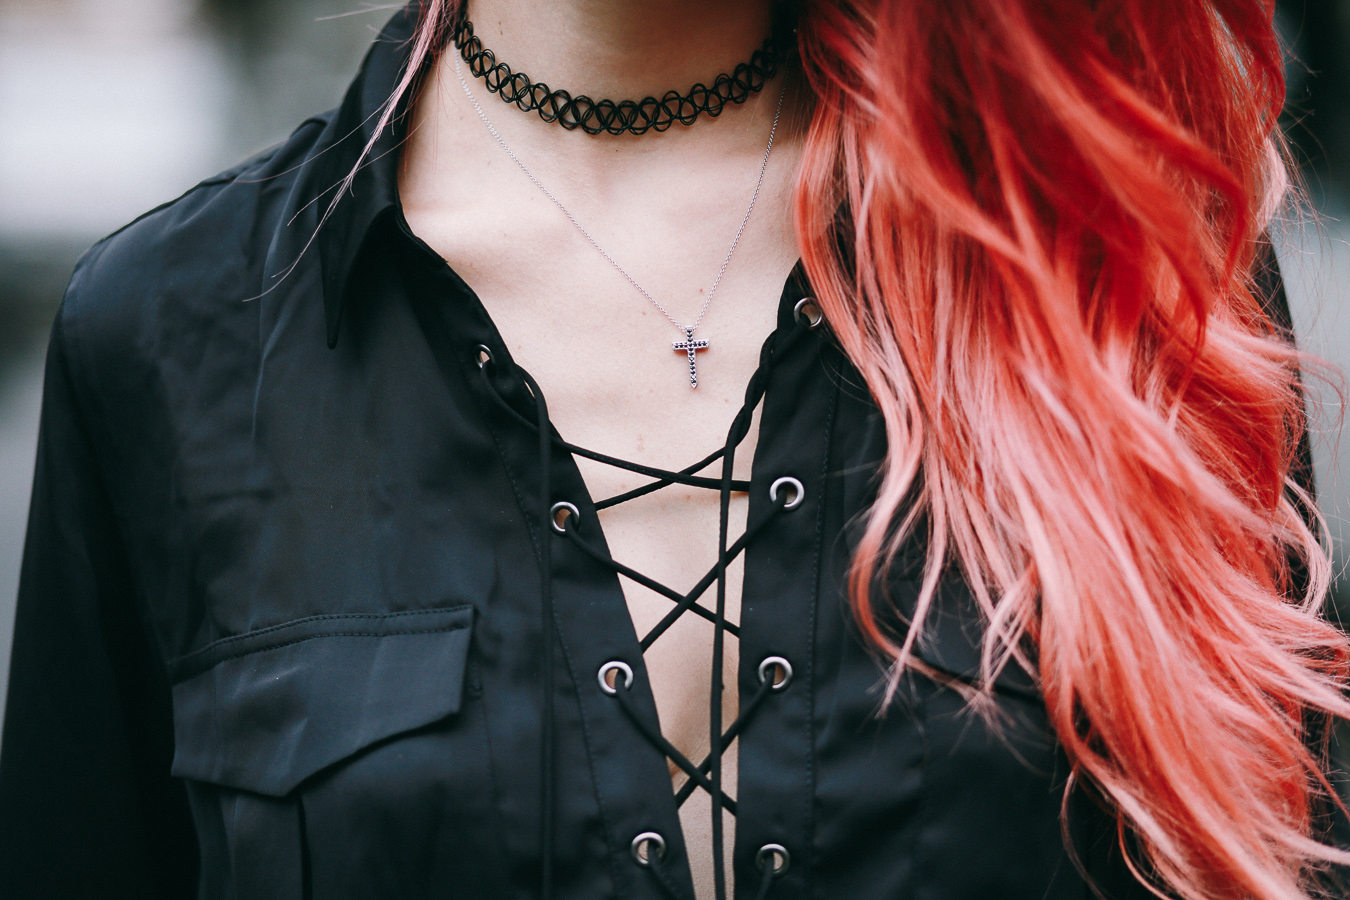 Le Happy wearing L'Academie blouse and diamond cross necklace